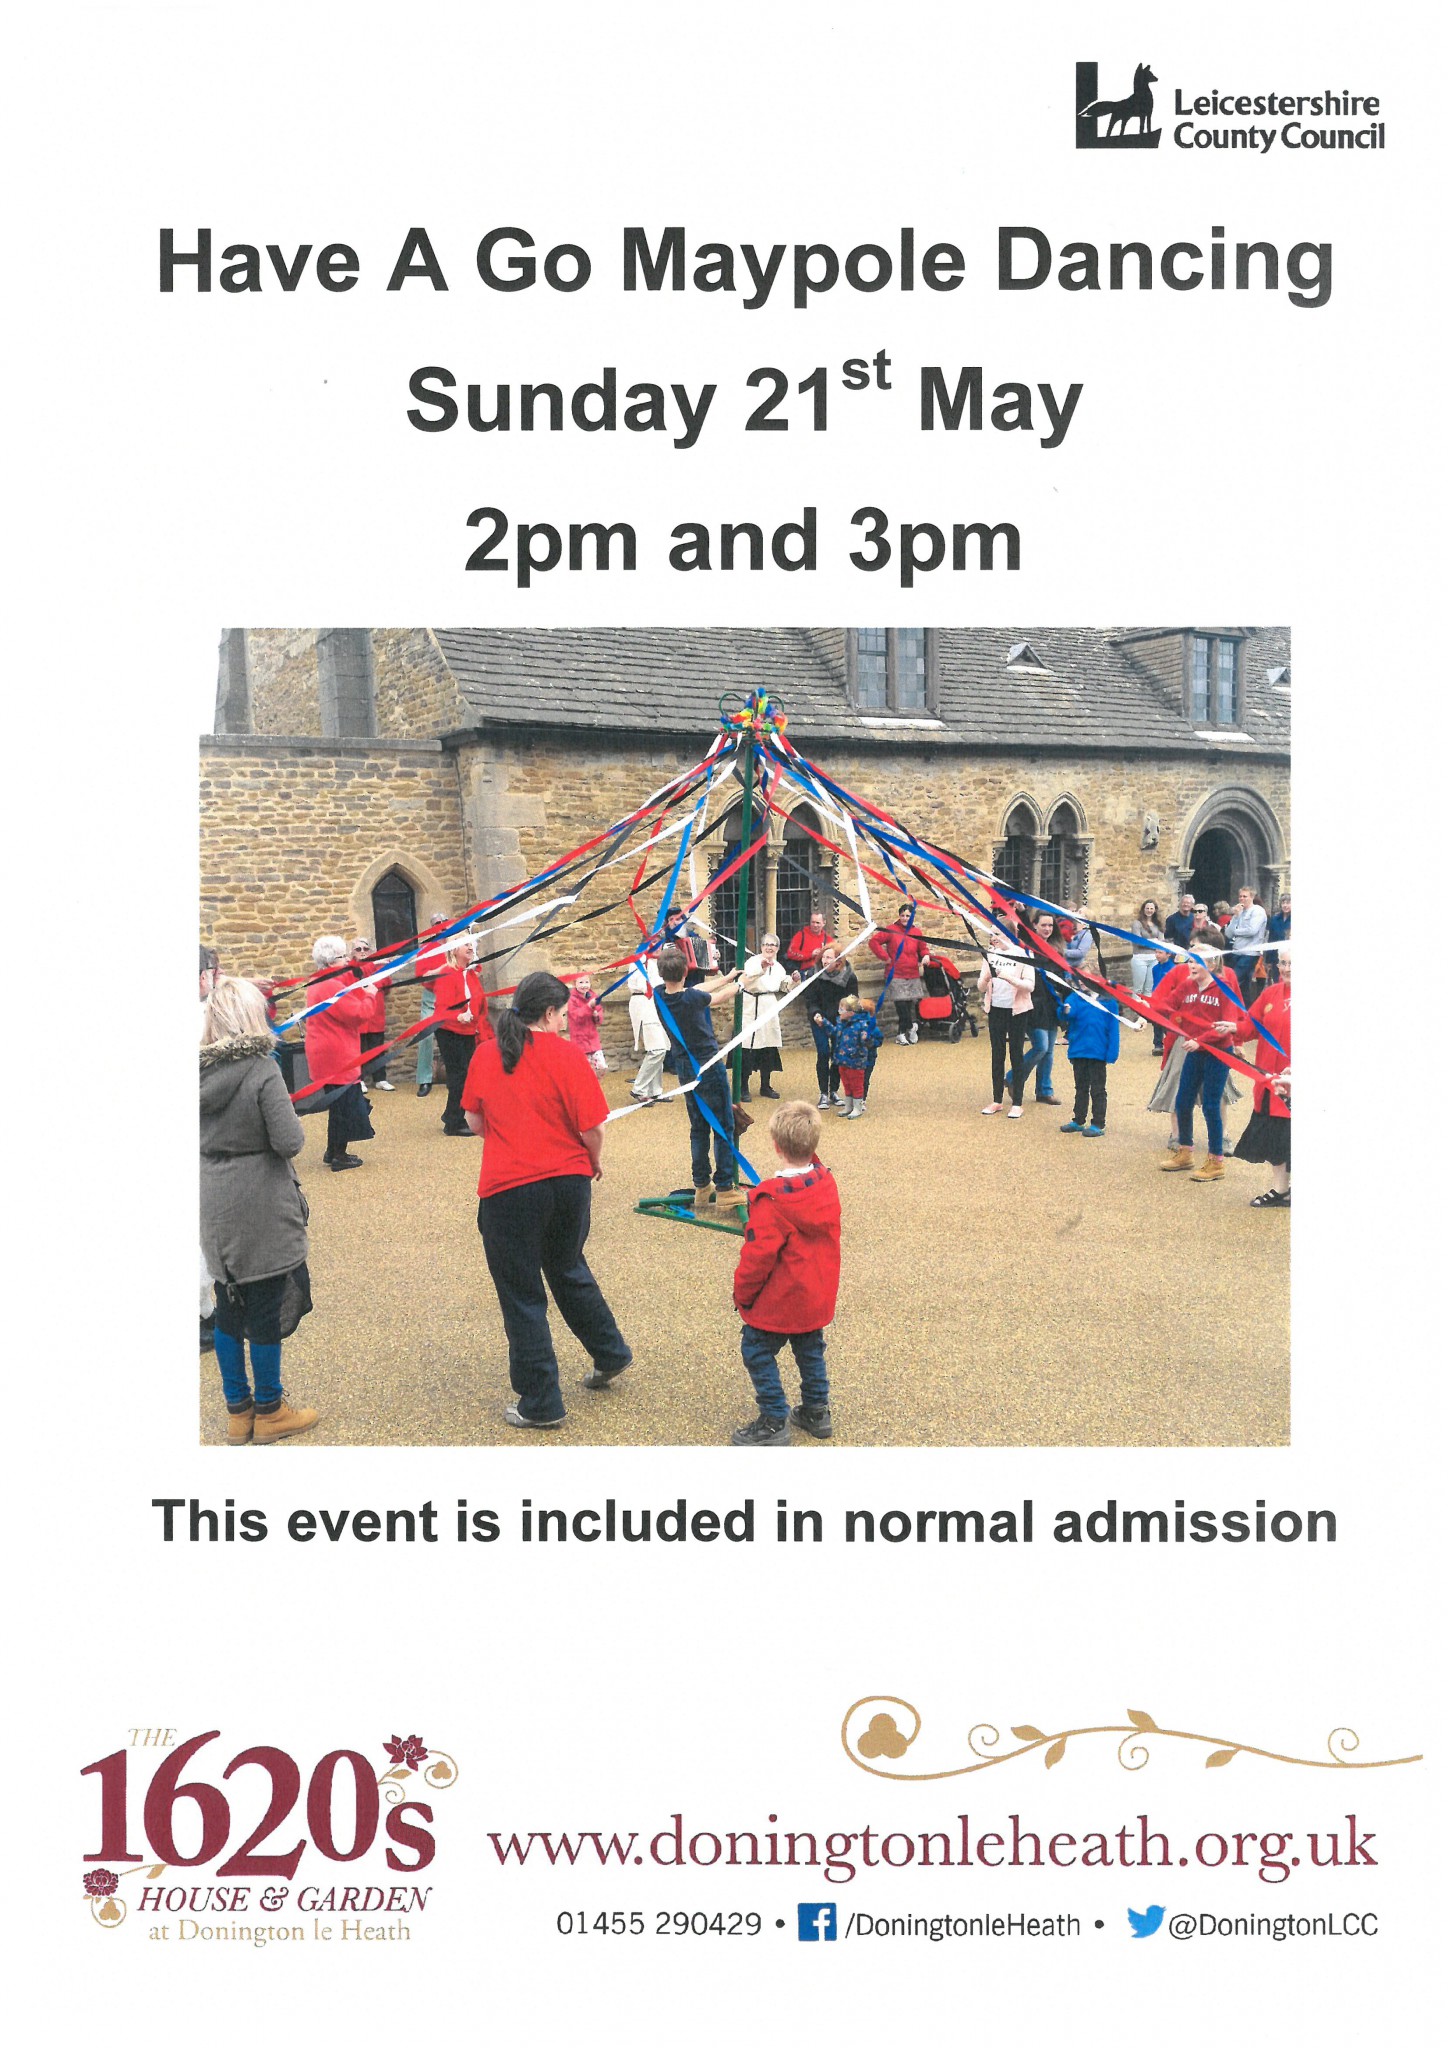 Have A Go Maypole Dancing